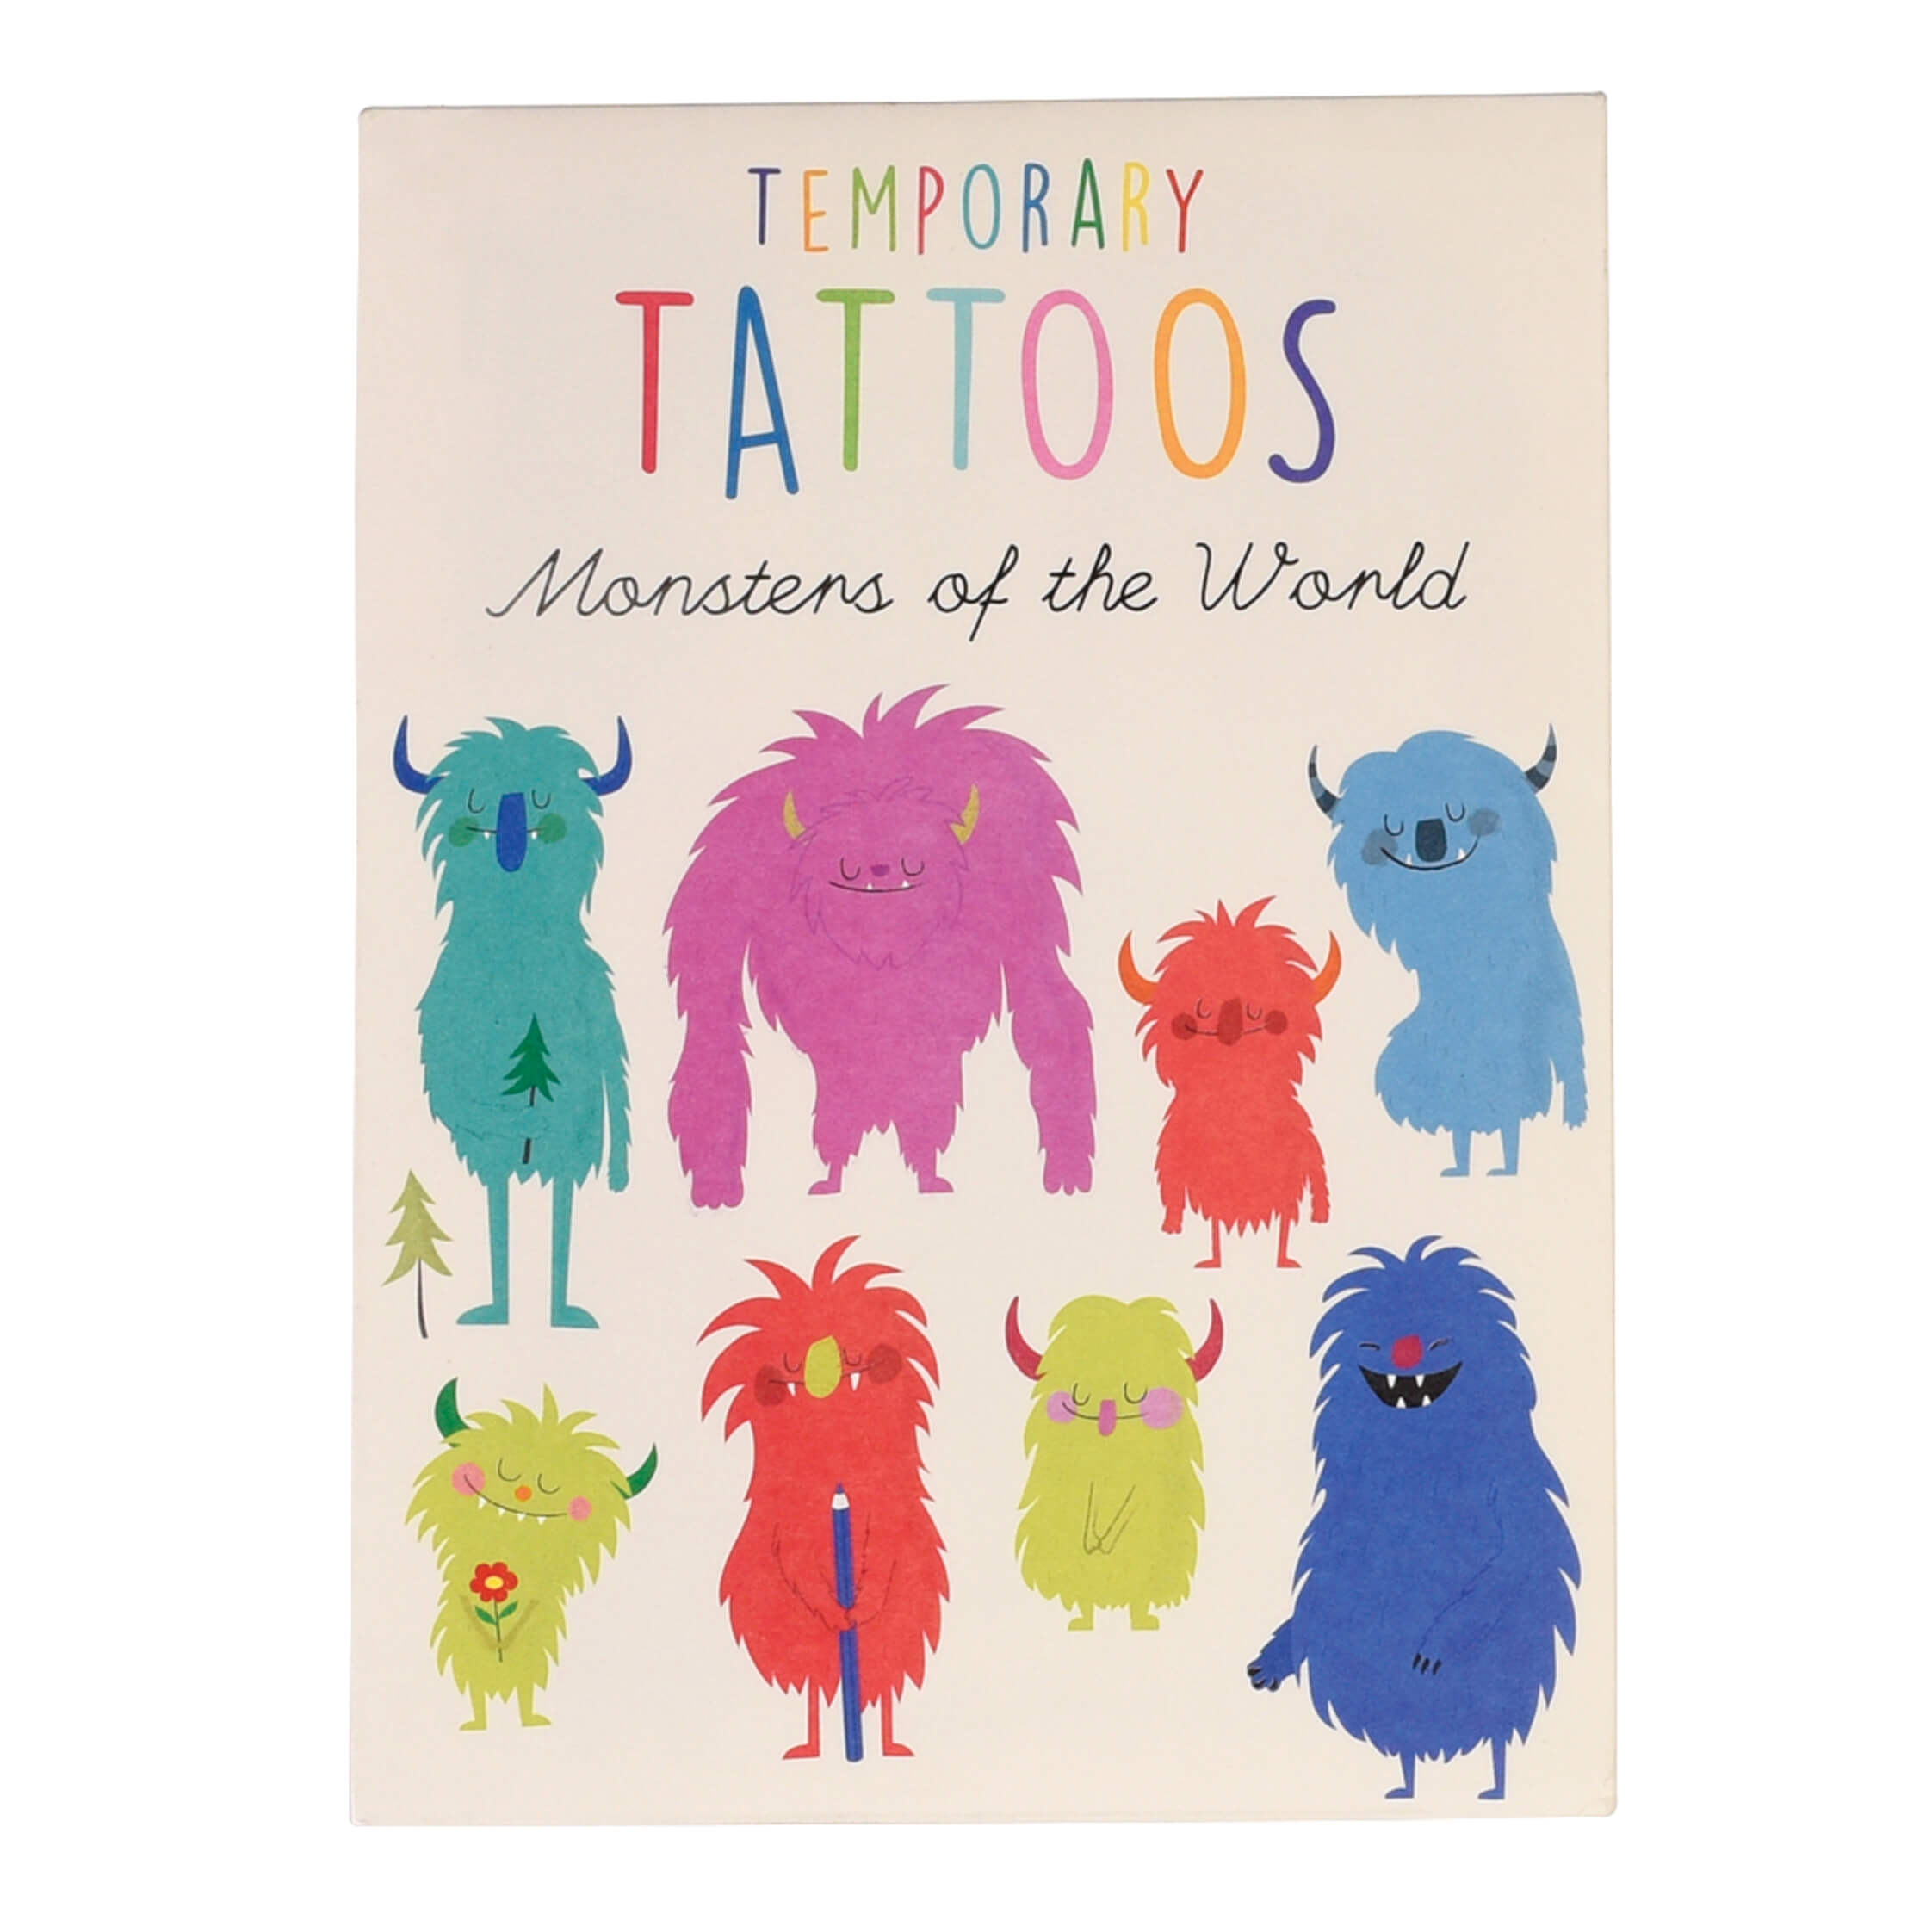 Tattoos Monsters of the World